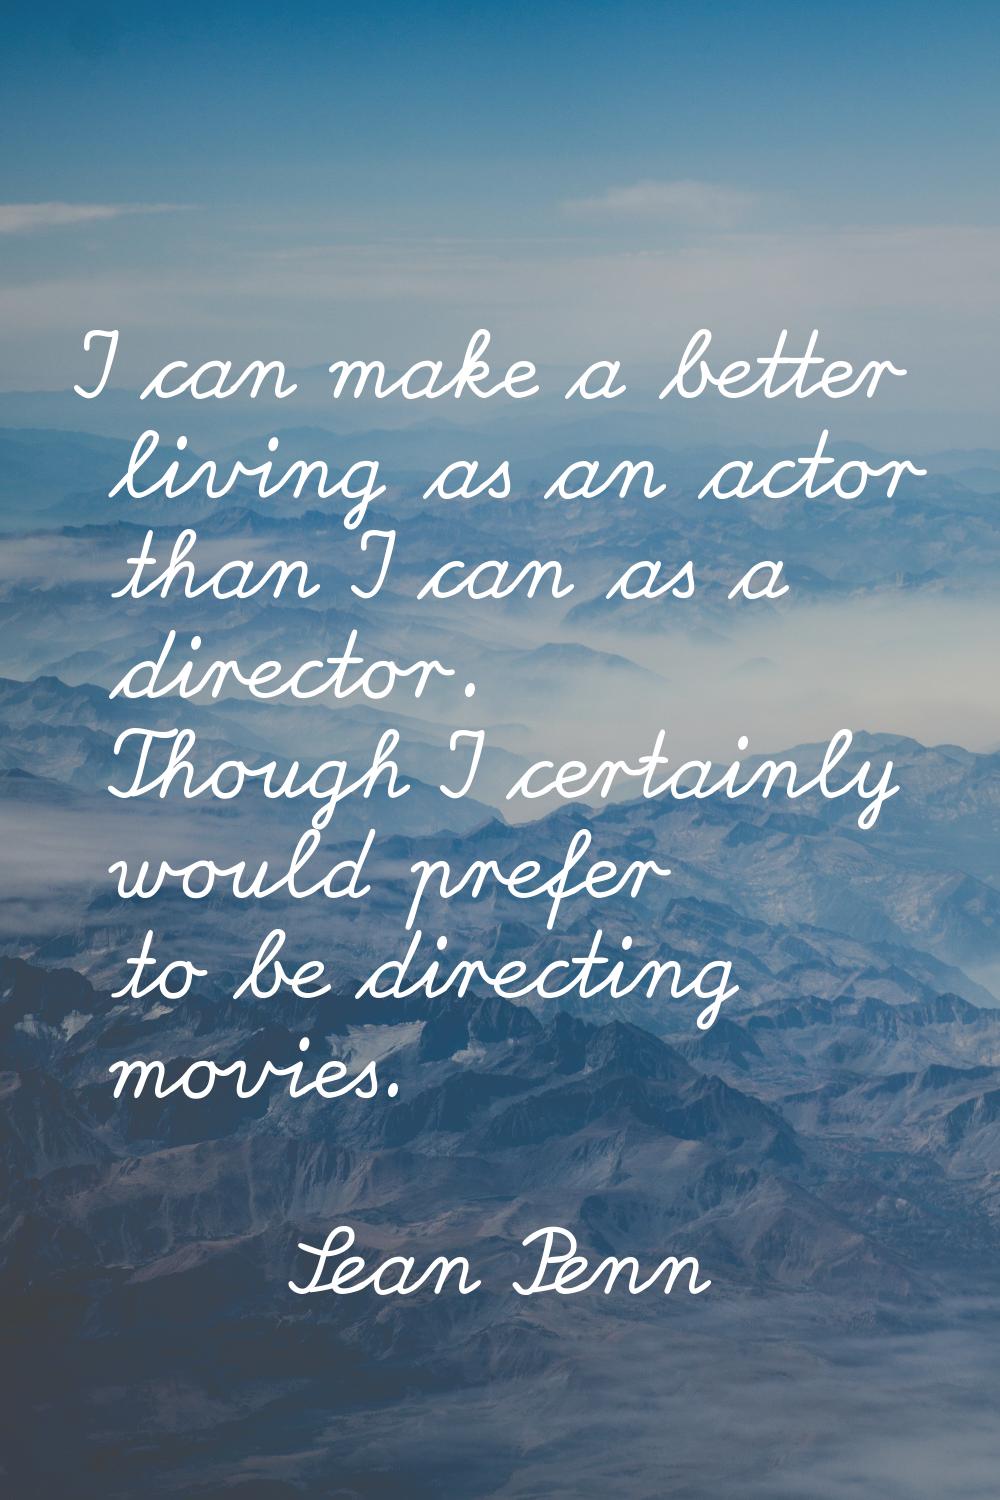 I can make a better living as an actor than I can as a director. Though I certainly would prefer to